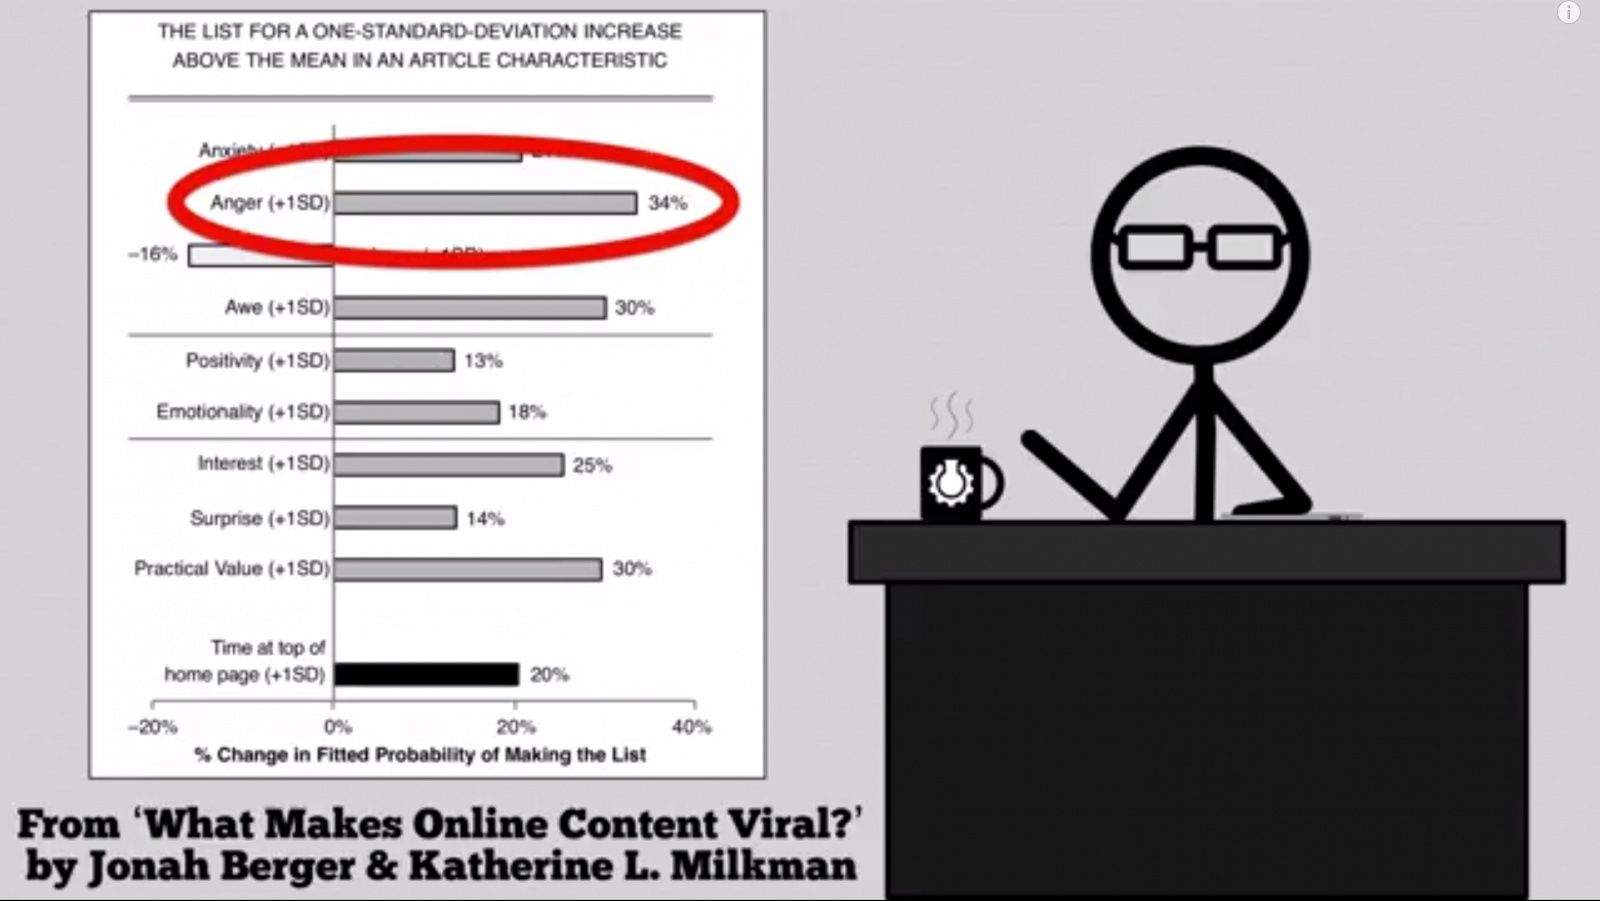 Need your online content to go viral? Get your opponents angry. Photo: CGP Grey/YouTube